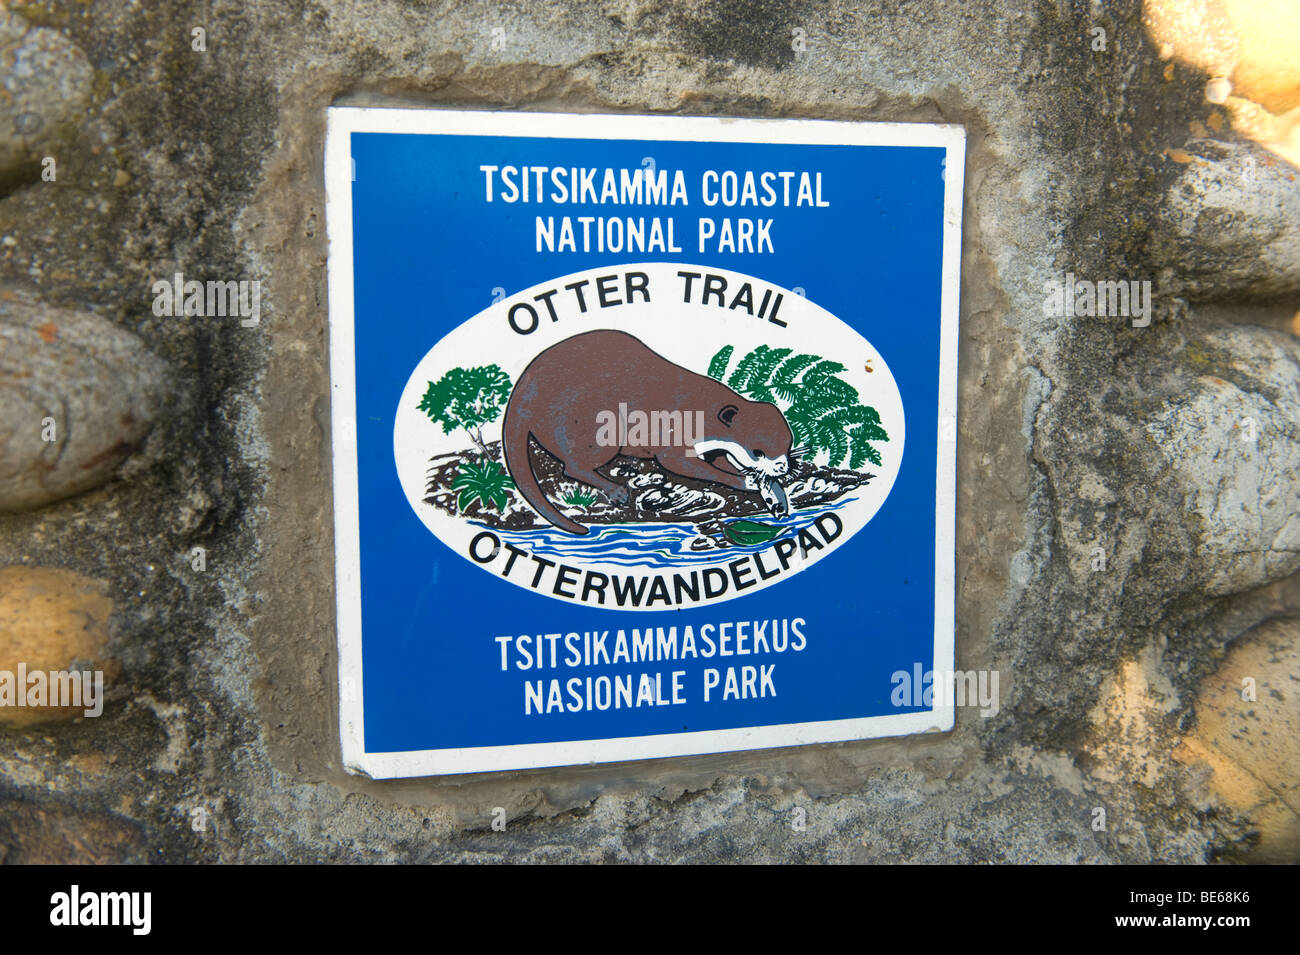 Otter Trail sign, Tsitsikama National Park, Garden Route, South Africa Banque D'Images